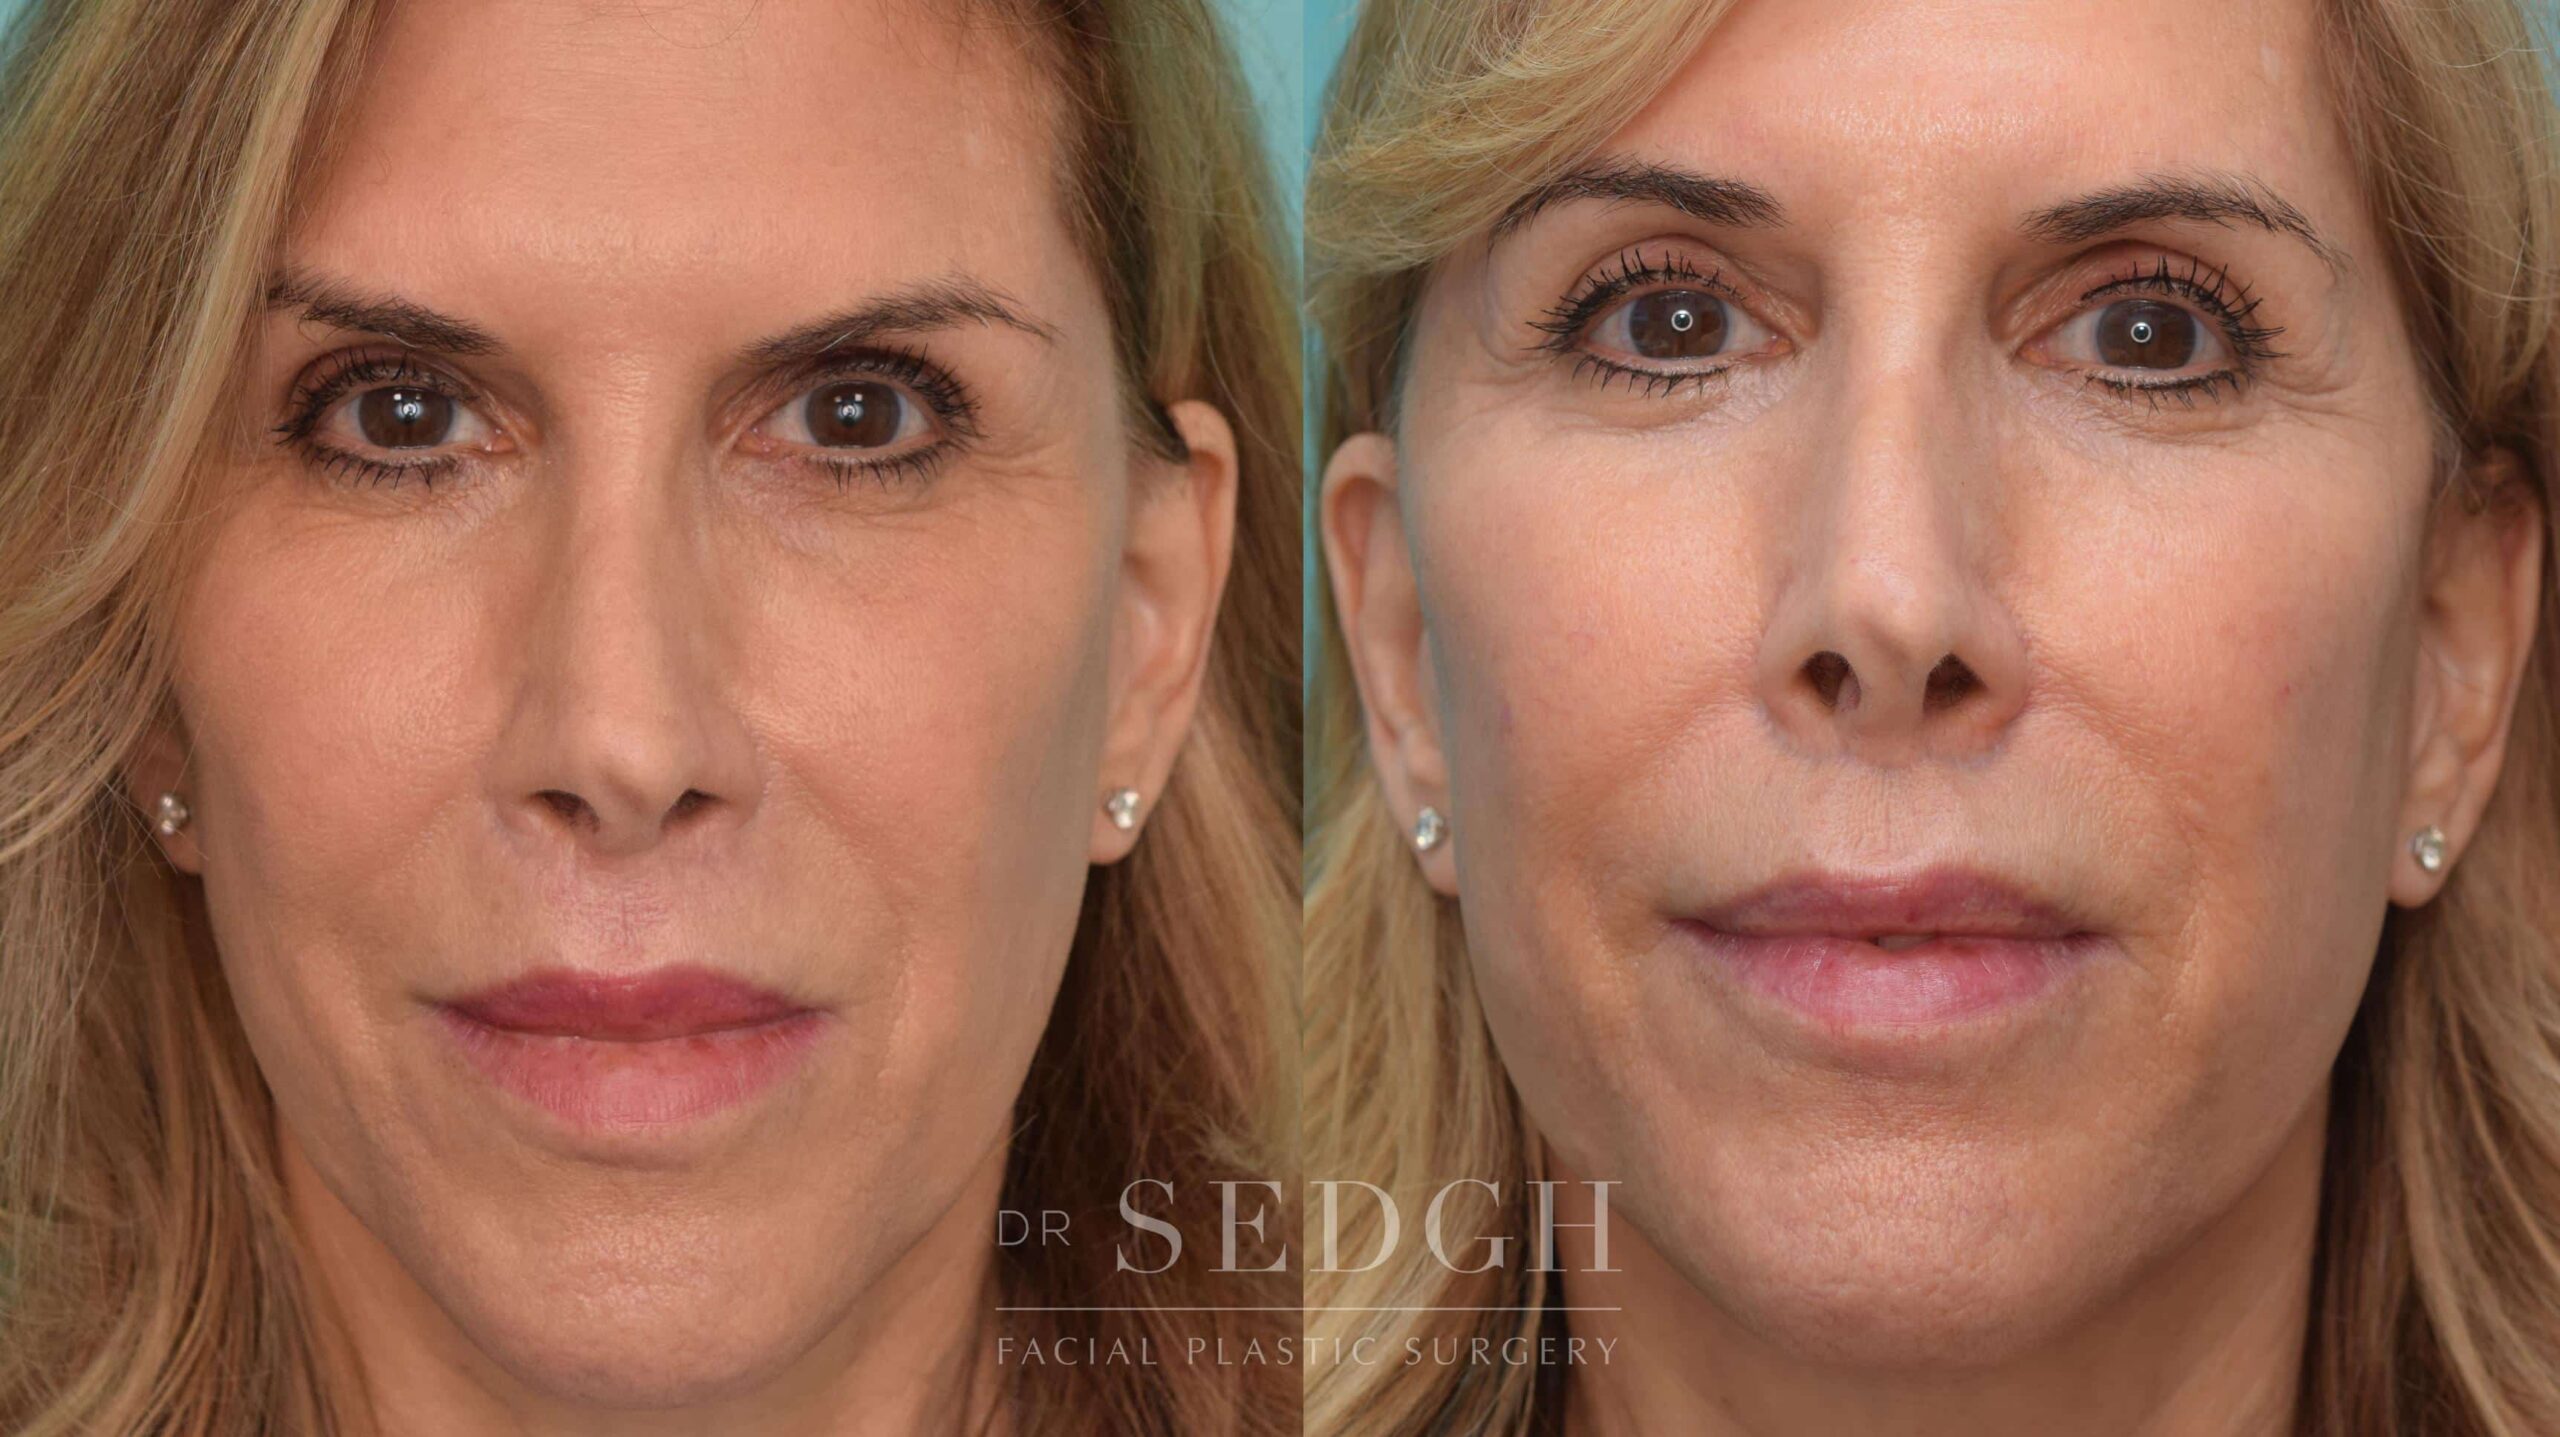 Lip Lift Before and After Photos | Dr. Sedgh